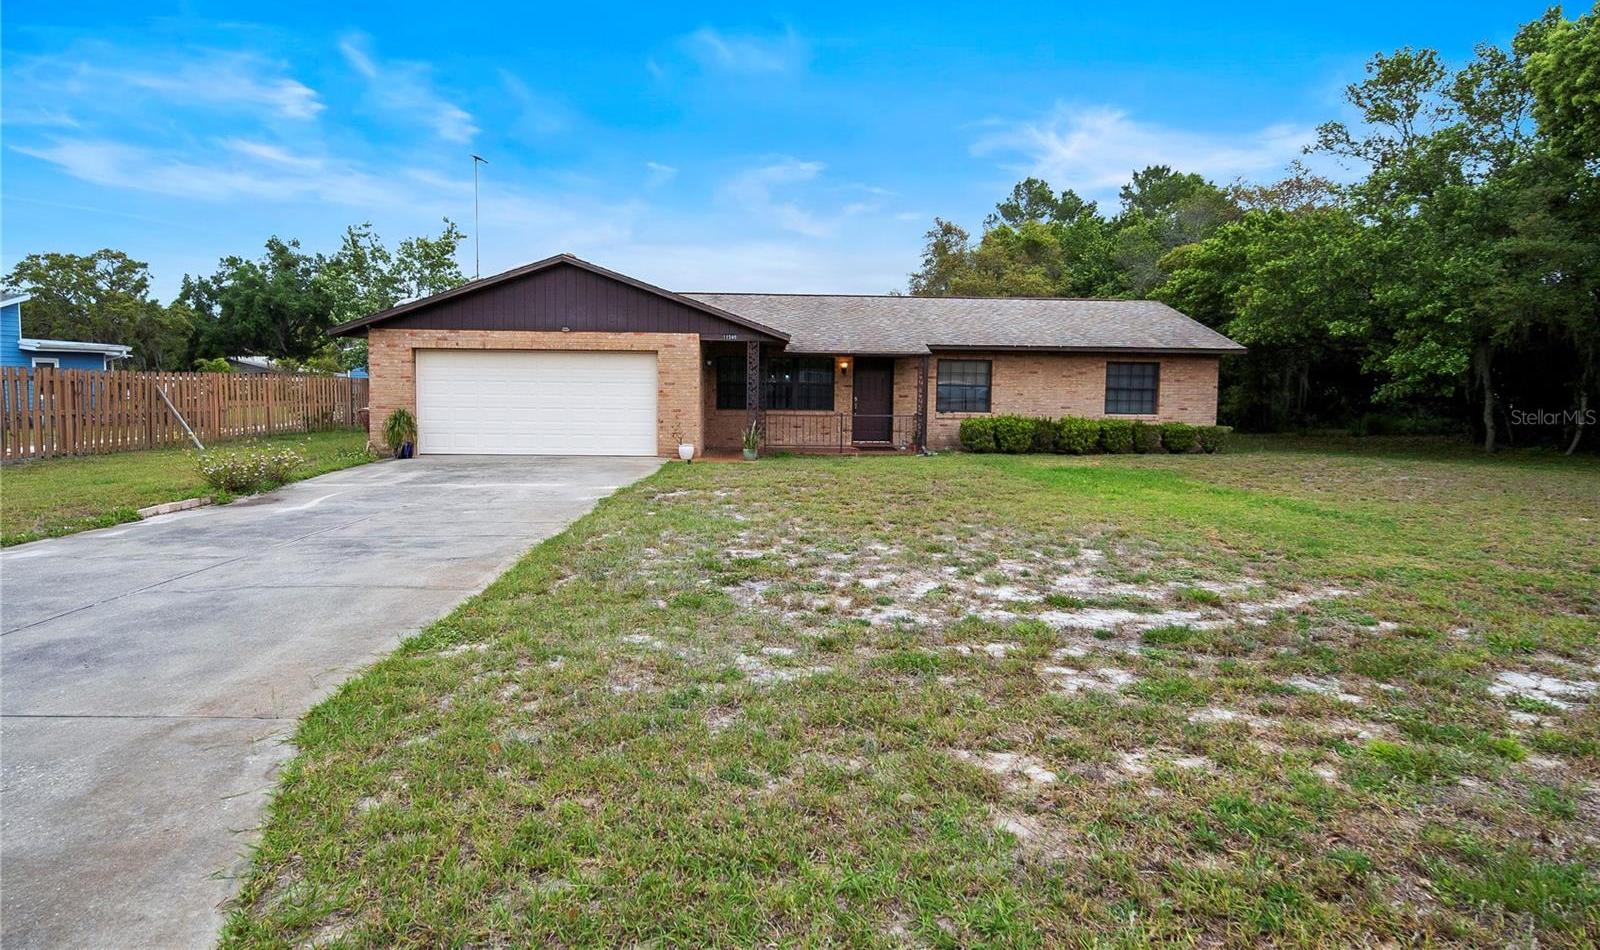 Photo one of 11549 Lakeview Dr Leesburg FL 34788 | MLS S5102462